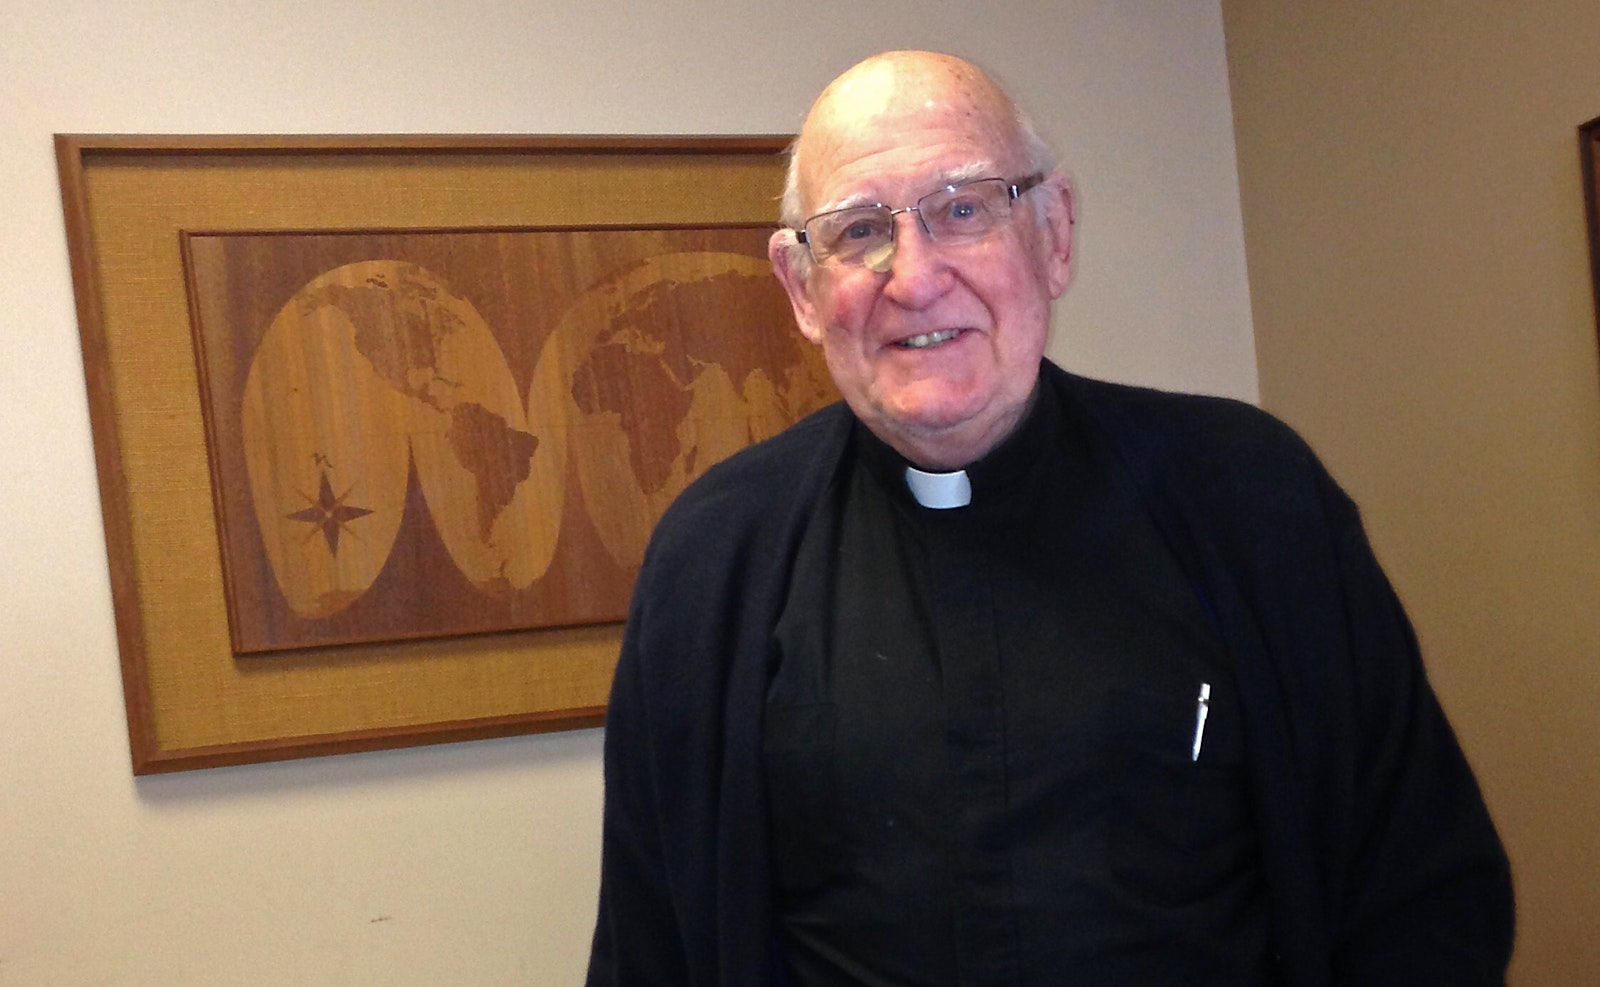 Msgr. Moloney is pictured next to a globe map in this 2015 file photo. Msgr. Moloney's personal touch and missionary heart made him specially suited to serve the missions, a roll he embraced for more than half a century in addition to his parish pastoral work. (Tim Keenan | Detroit Catholic file photo)